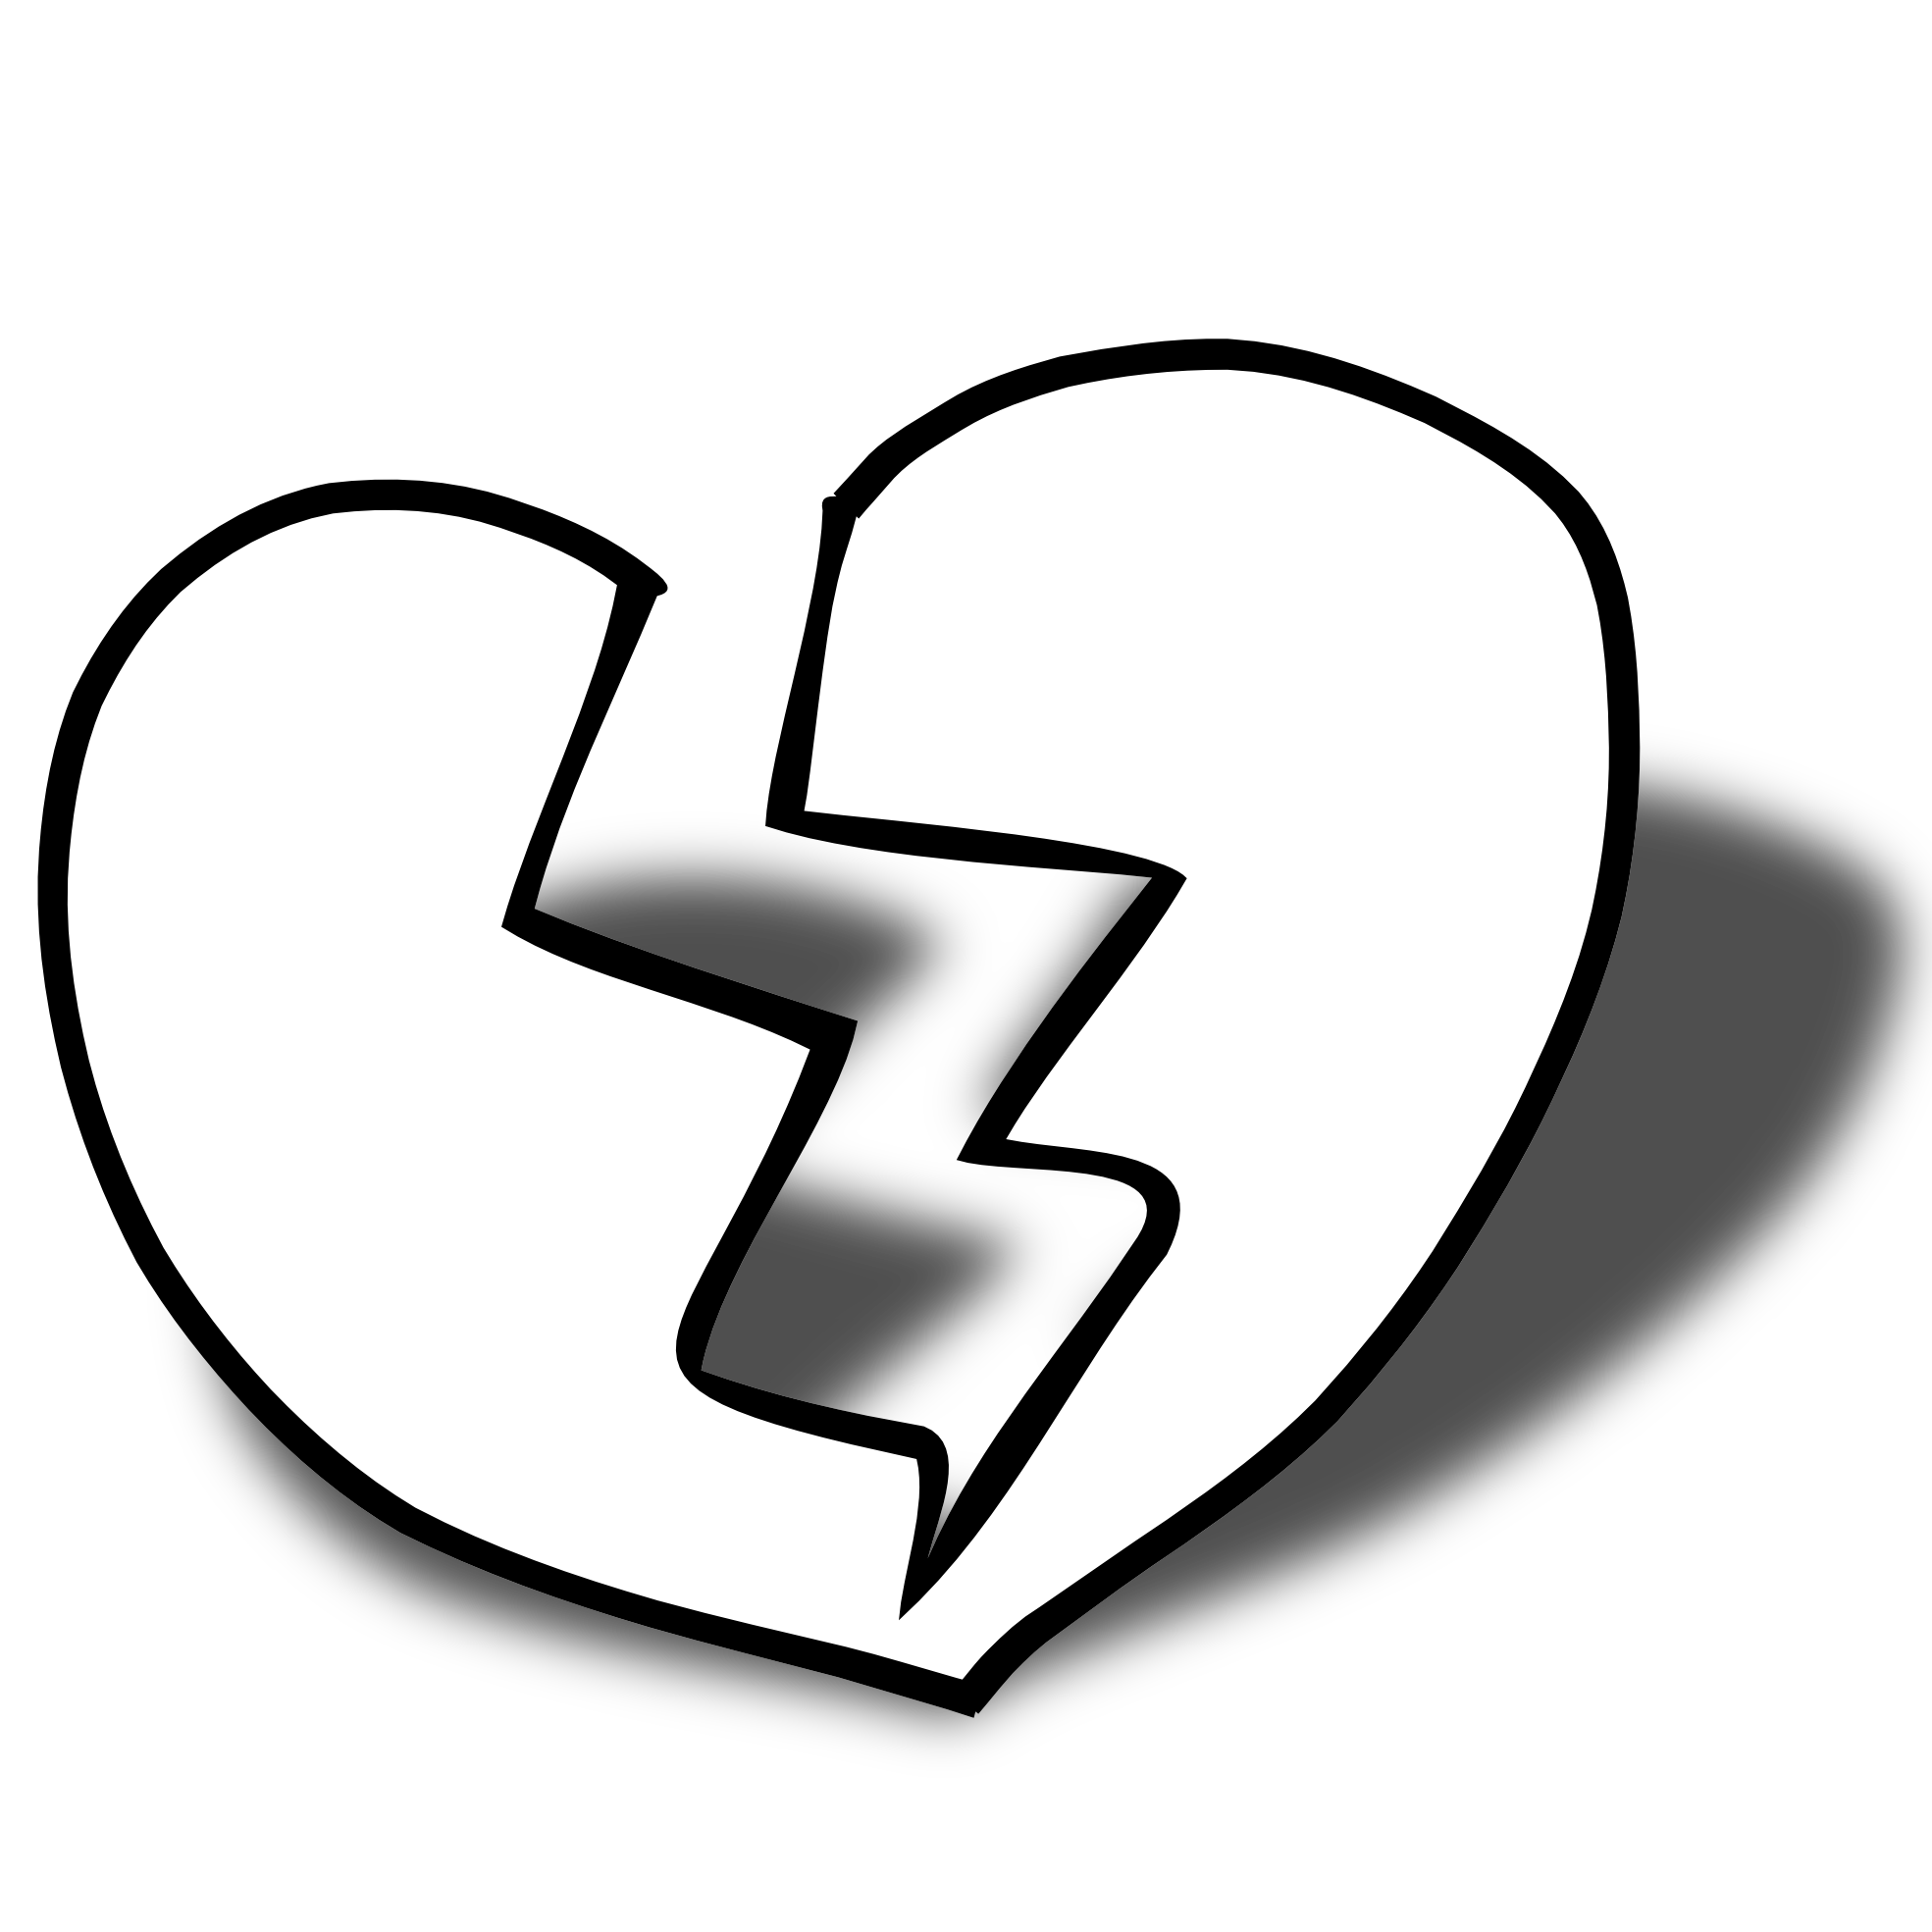 Clipart Heart Black And White - ClipArt Best